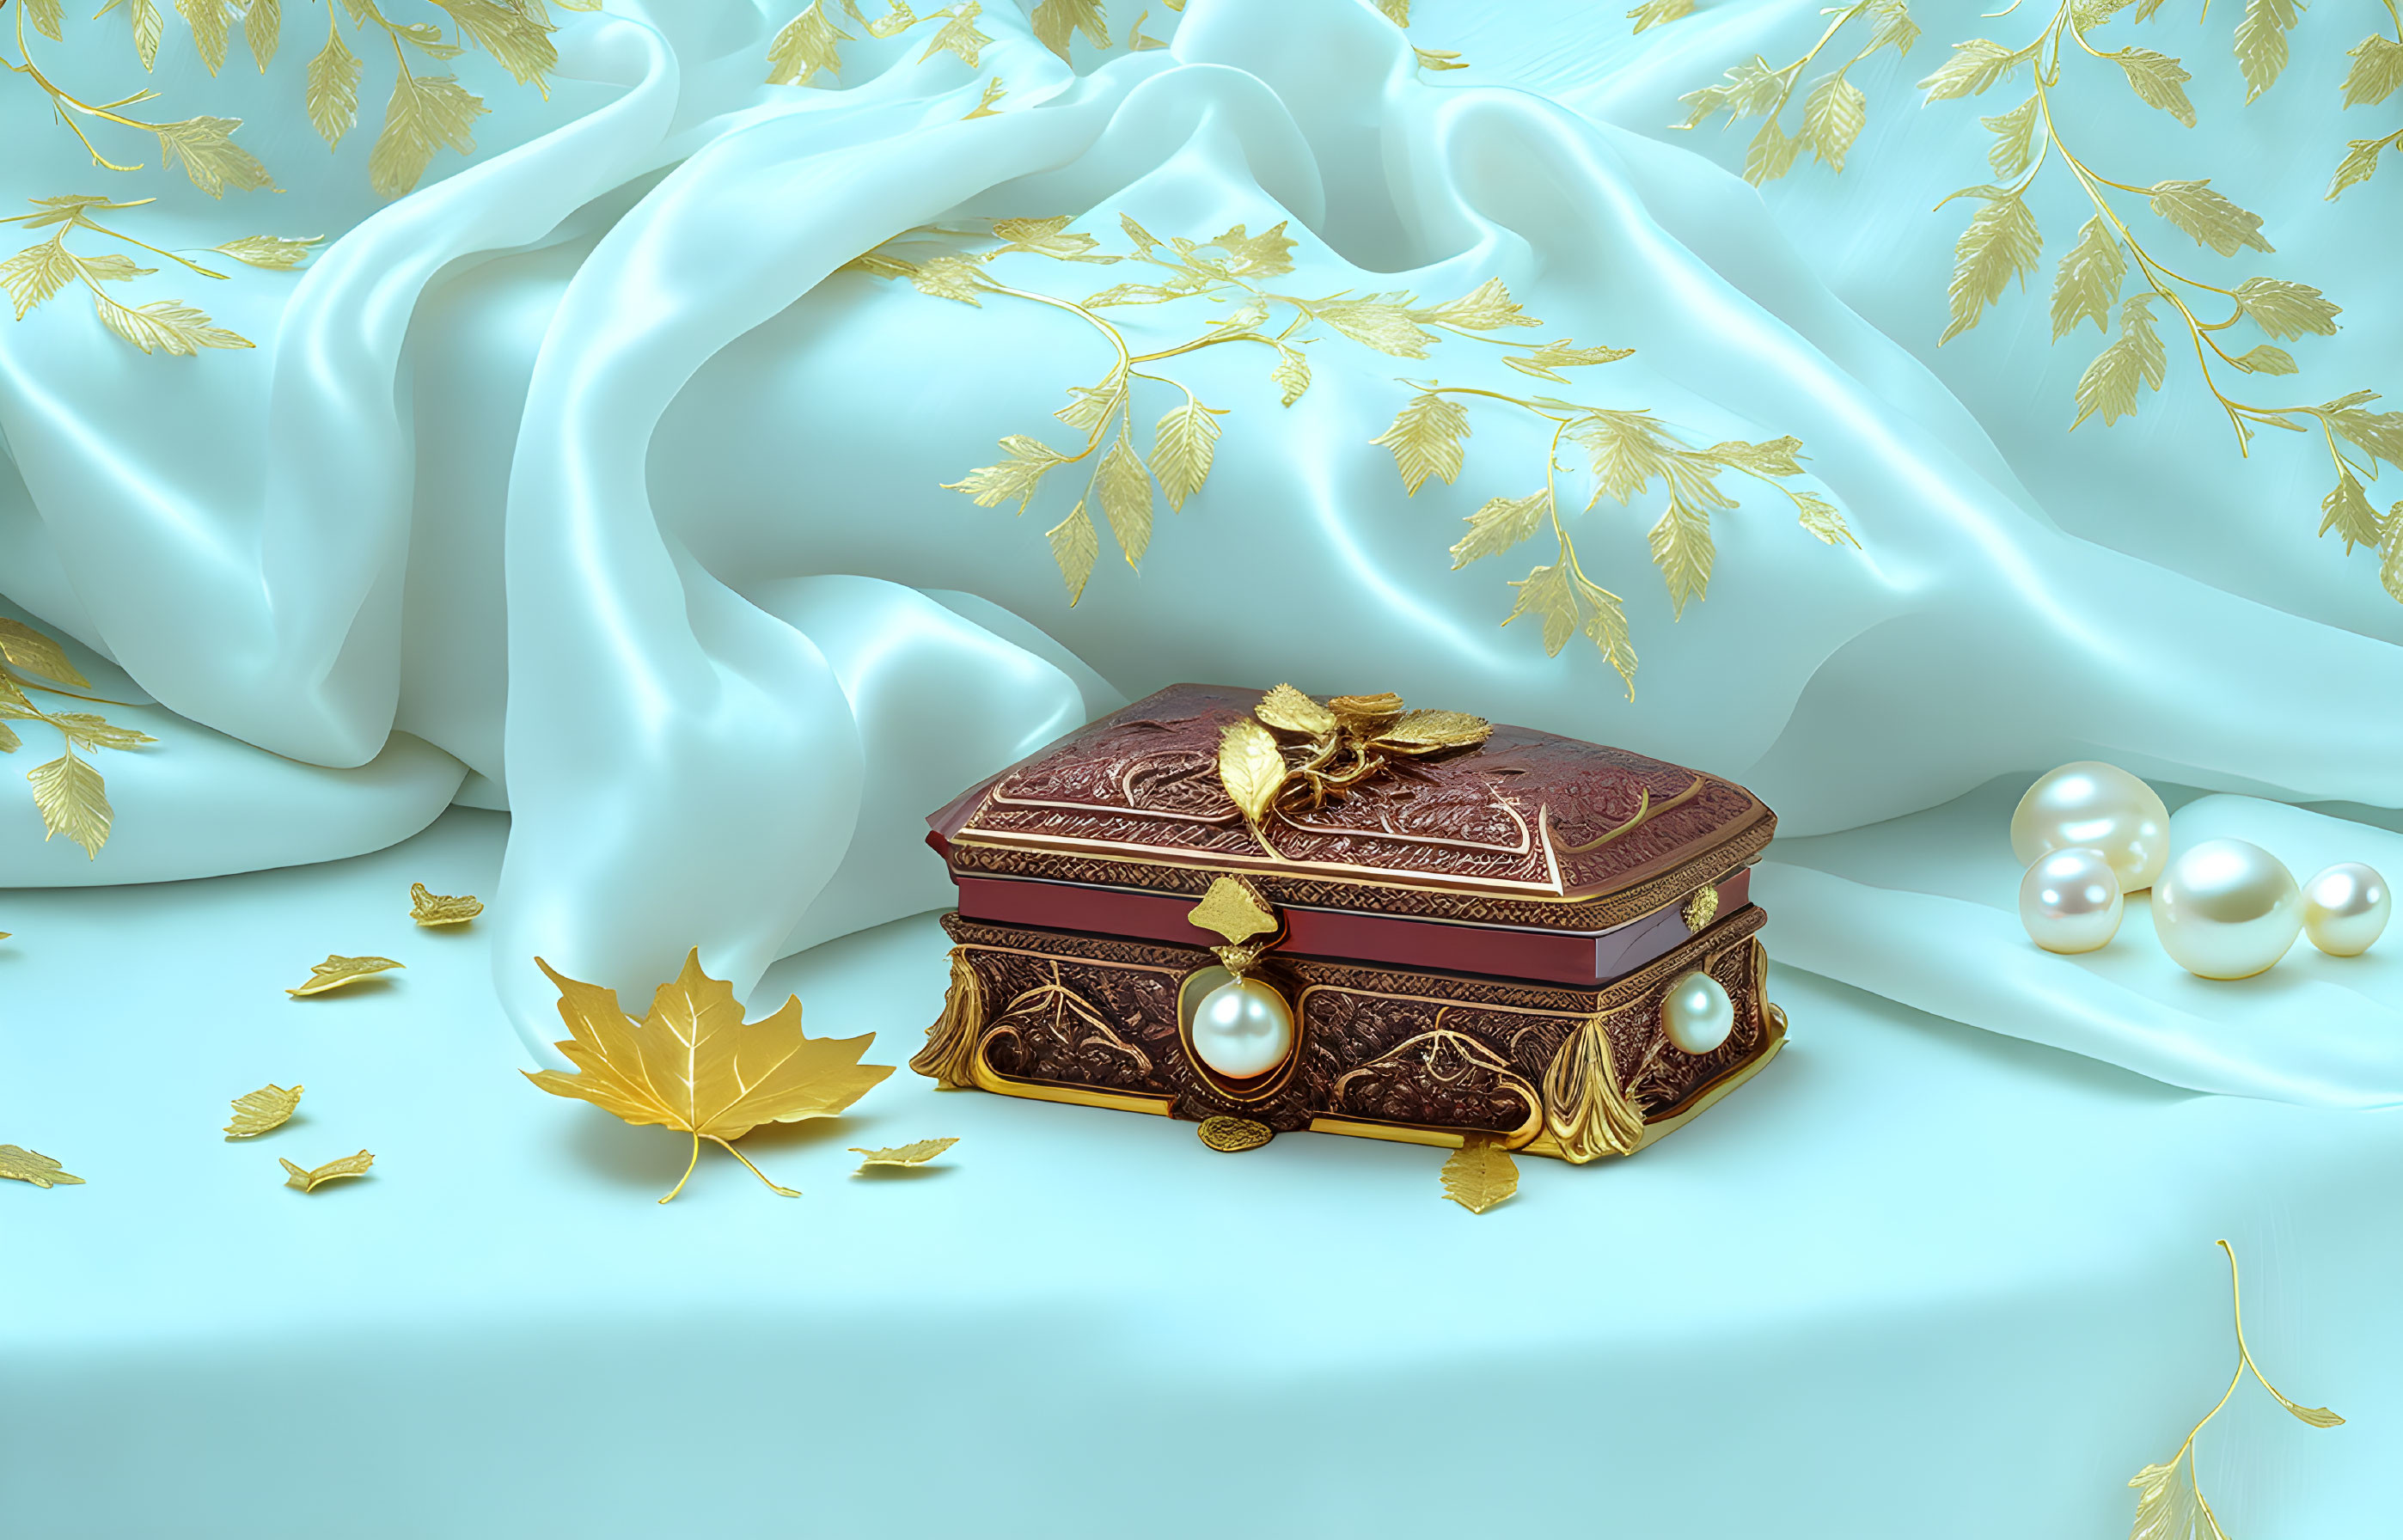 Ornate Box with Gold Leaf and Pearls on Teal Fabric surrounded by Golden Leaves